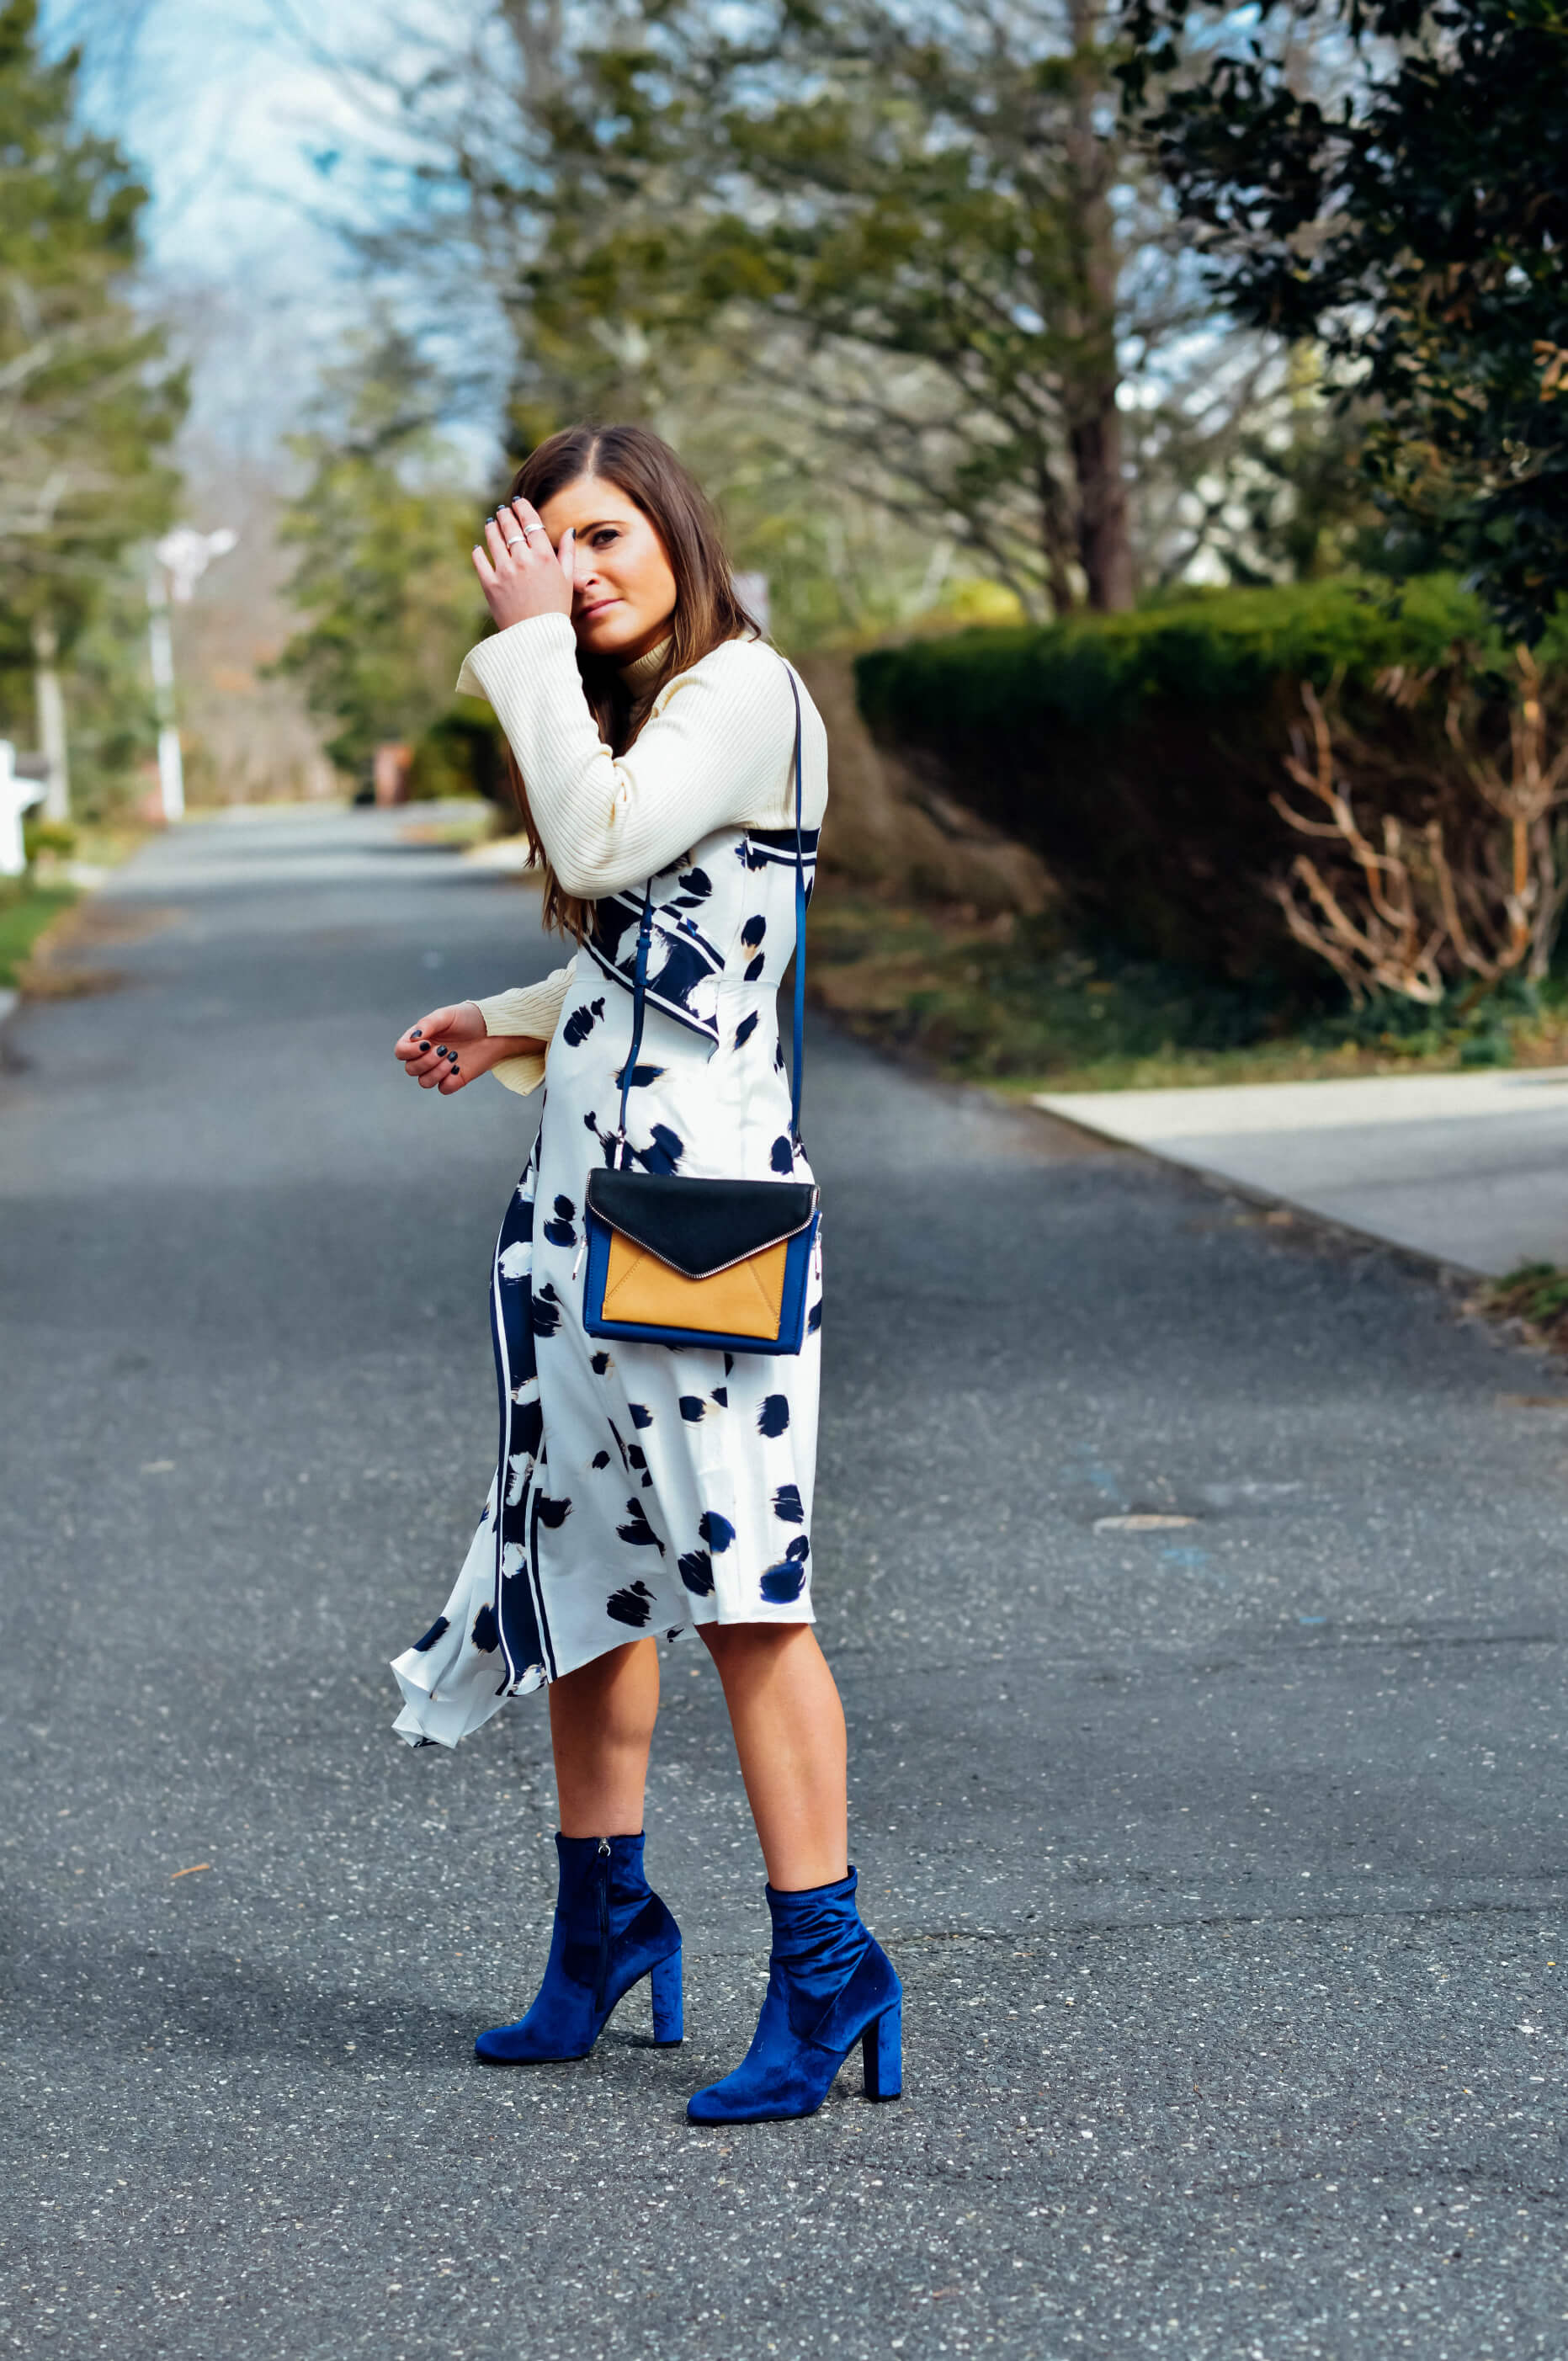 Banana Republic Dress, Rebecca Minkoff Bag, Spring Layers, Outfit Inspiration, Tilden of To Be Bright